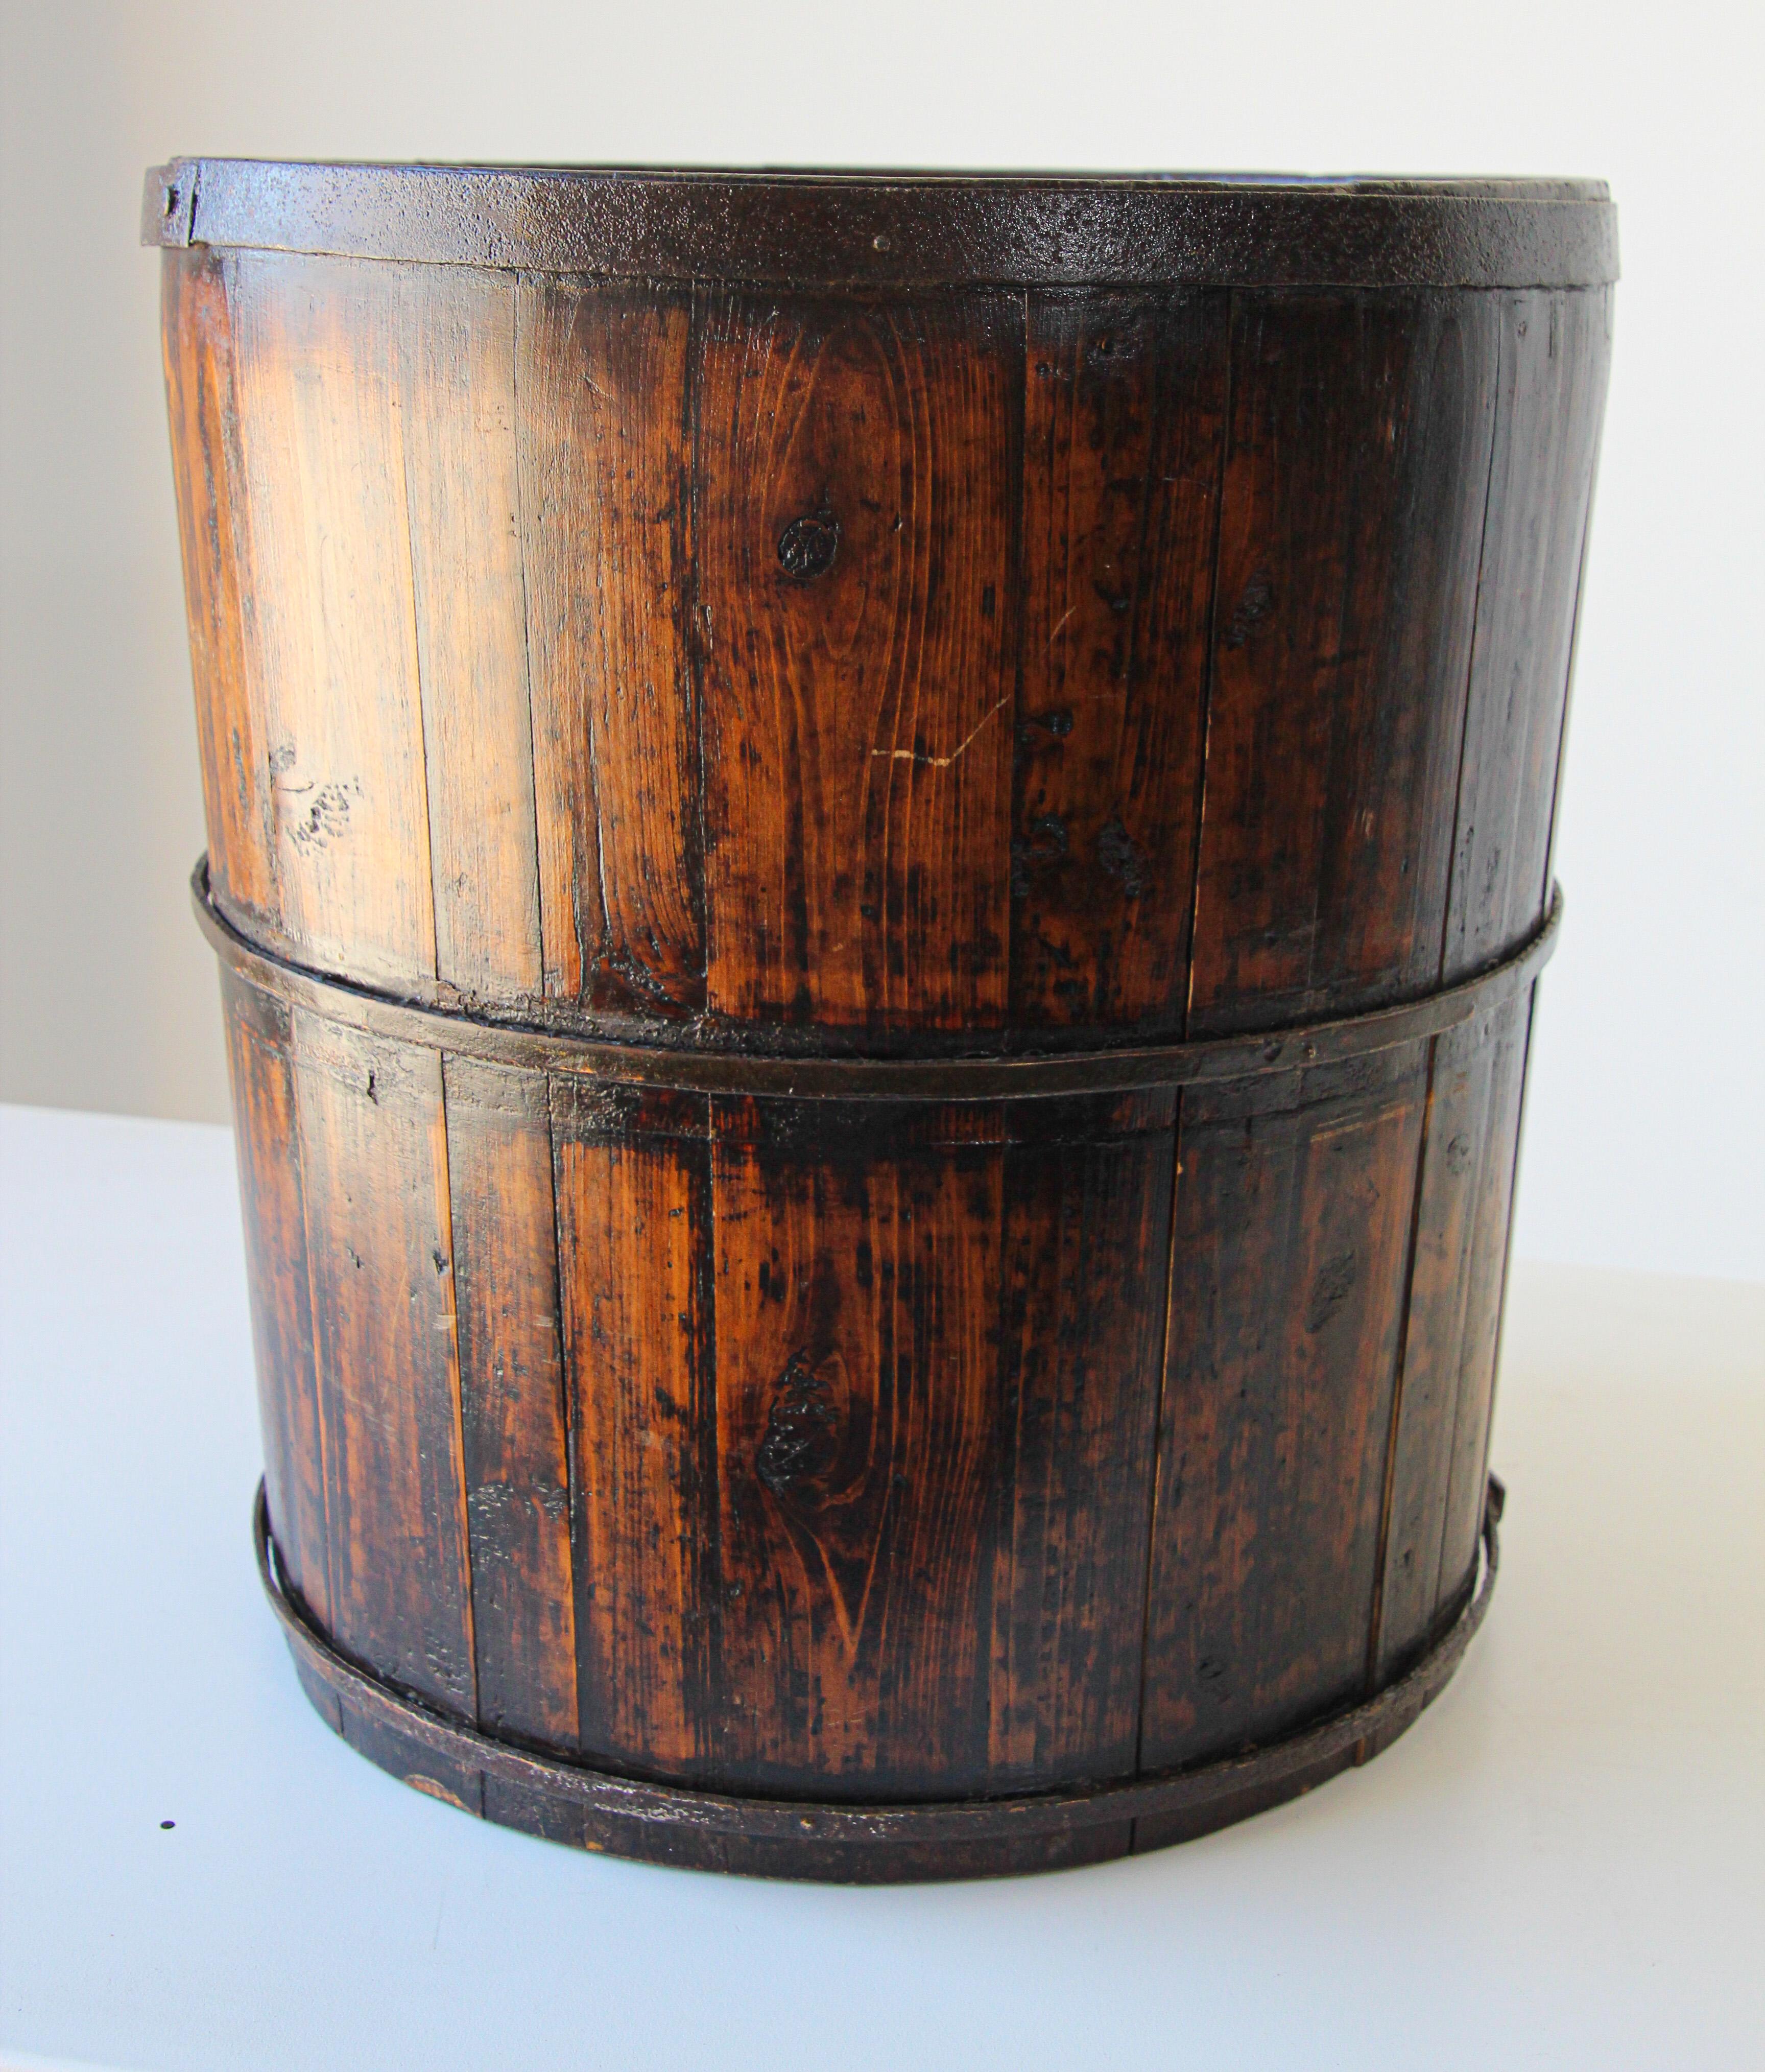 Hand-Crafted Asian Chinese Export Wood Bucket with Wrought Iron Bands